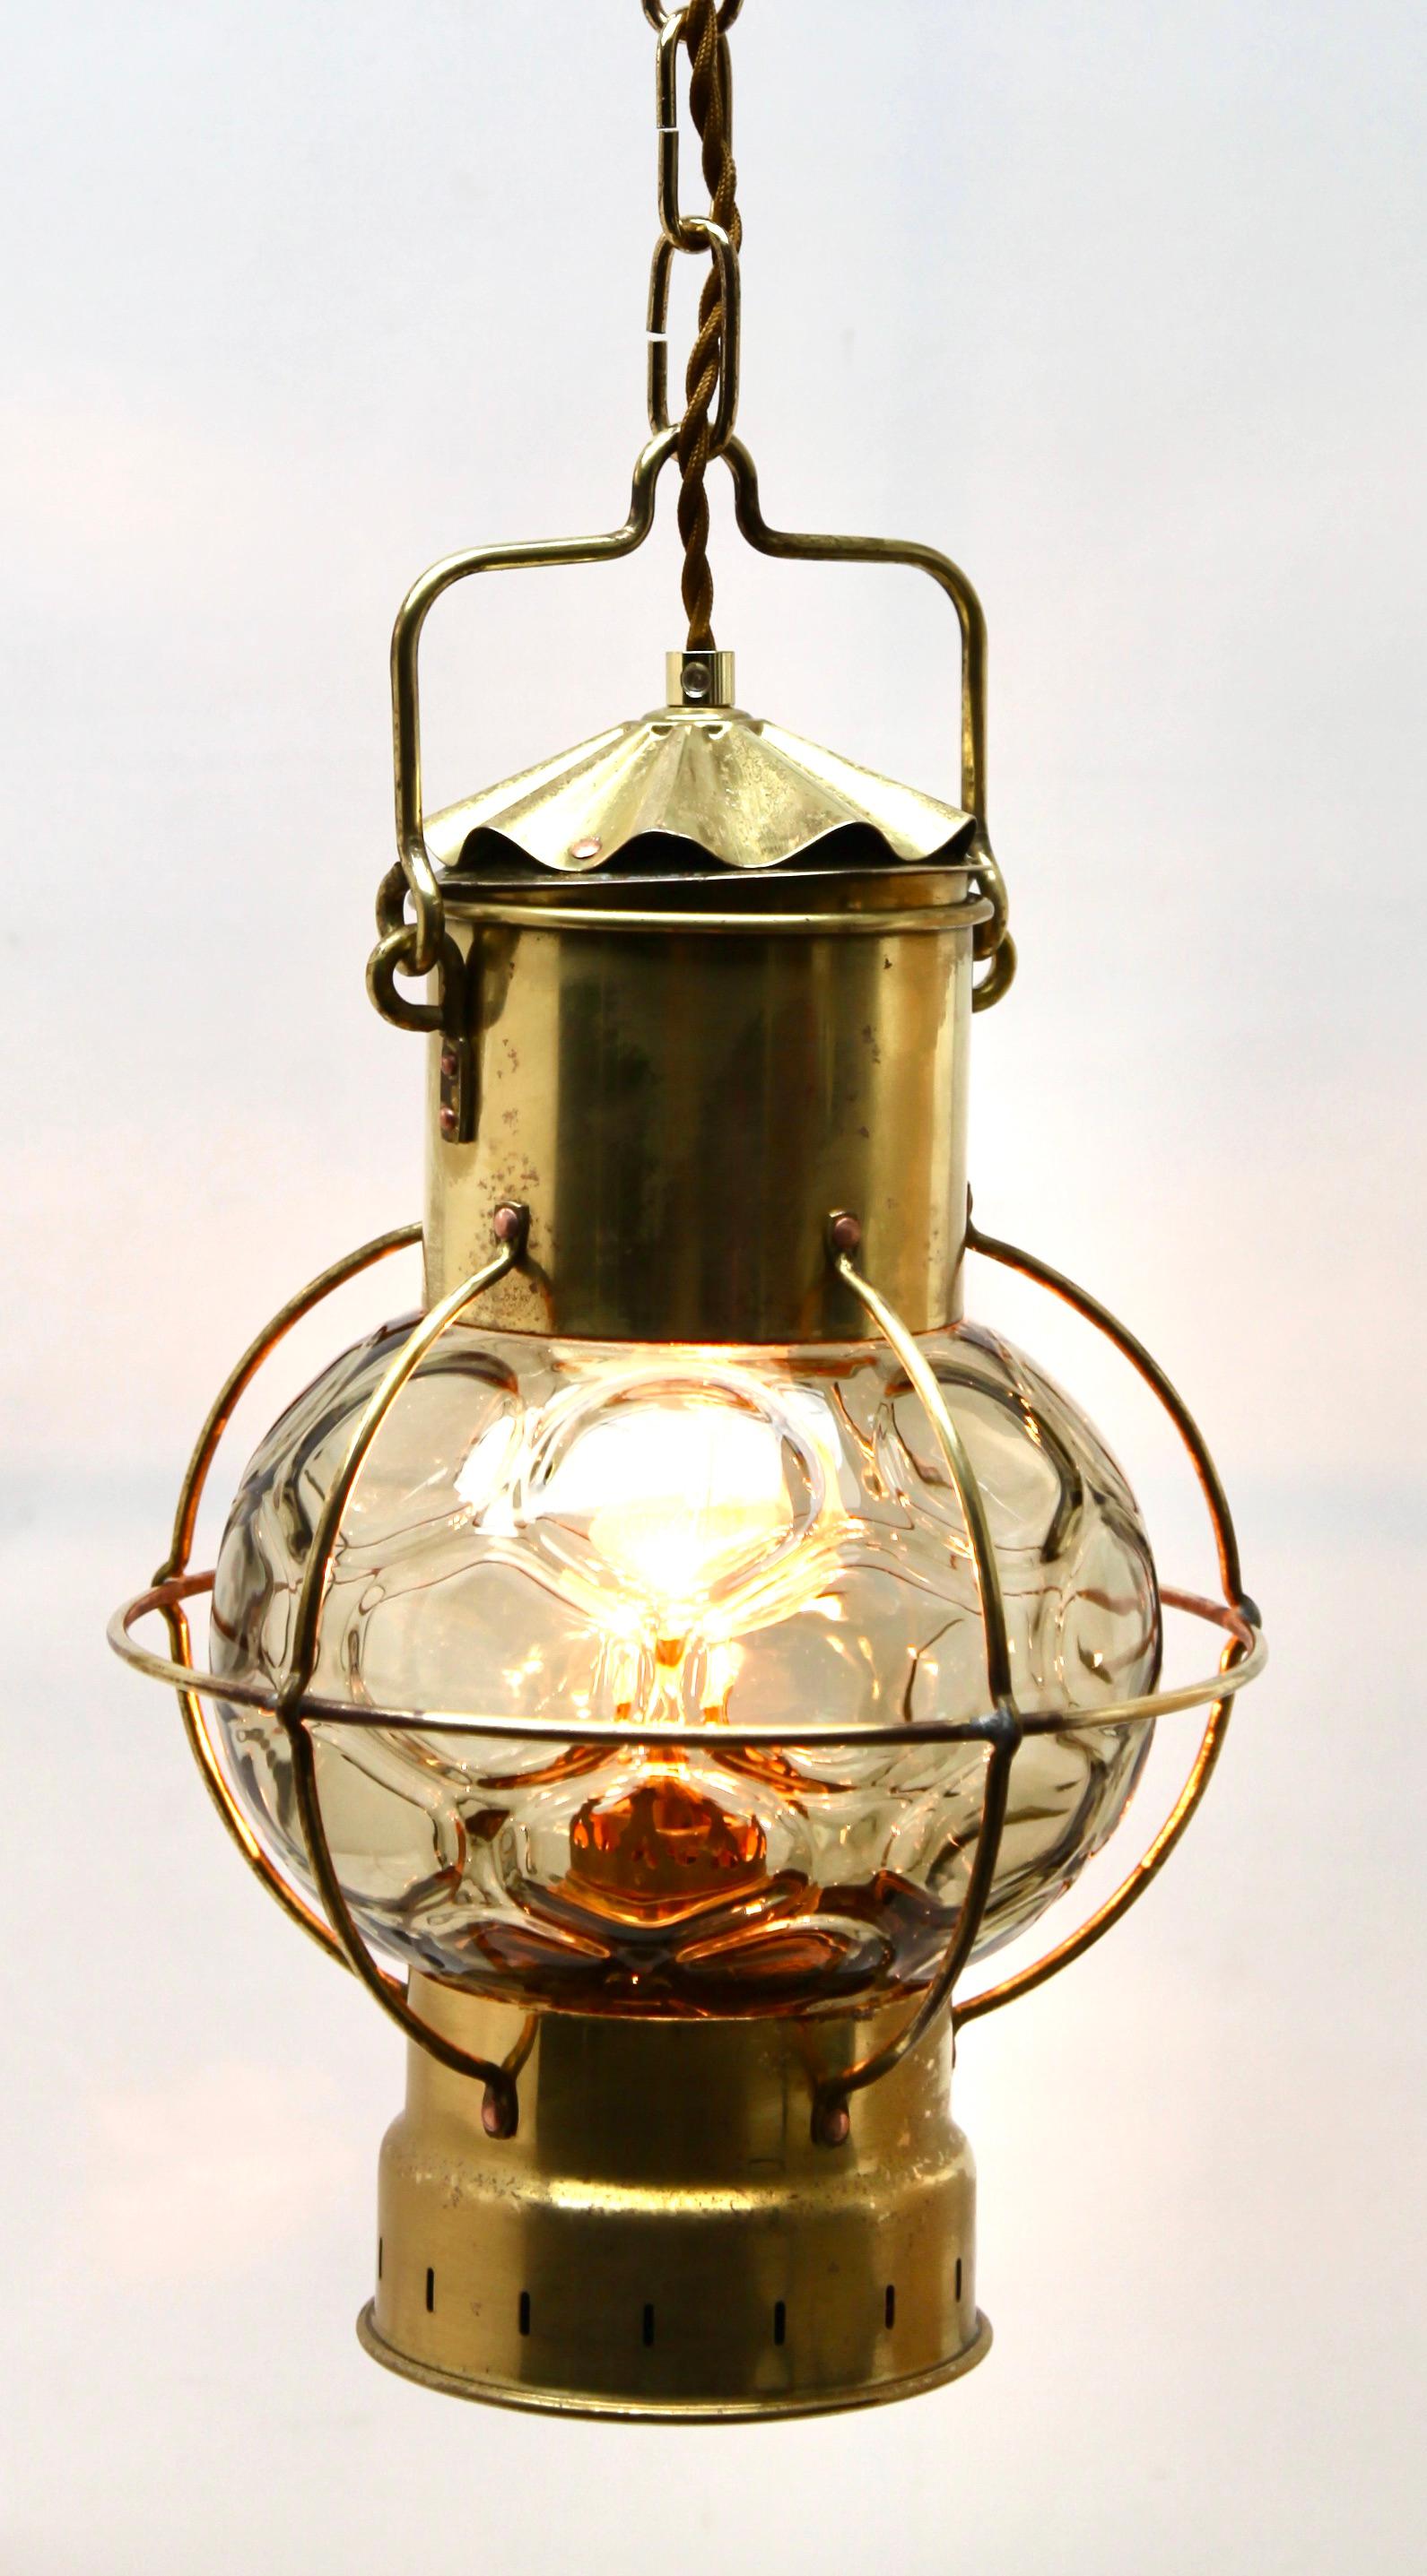 Brenner Kosmos oil ships lamp
Antique early 1900s Kosmos Brenner oil converted to electric ceiling hanging lamp
Old oil lamp ship lamp Kosmos Brenner
With the original burner still in it.

As service: We can adjust the lamp Height for you in